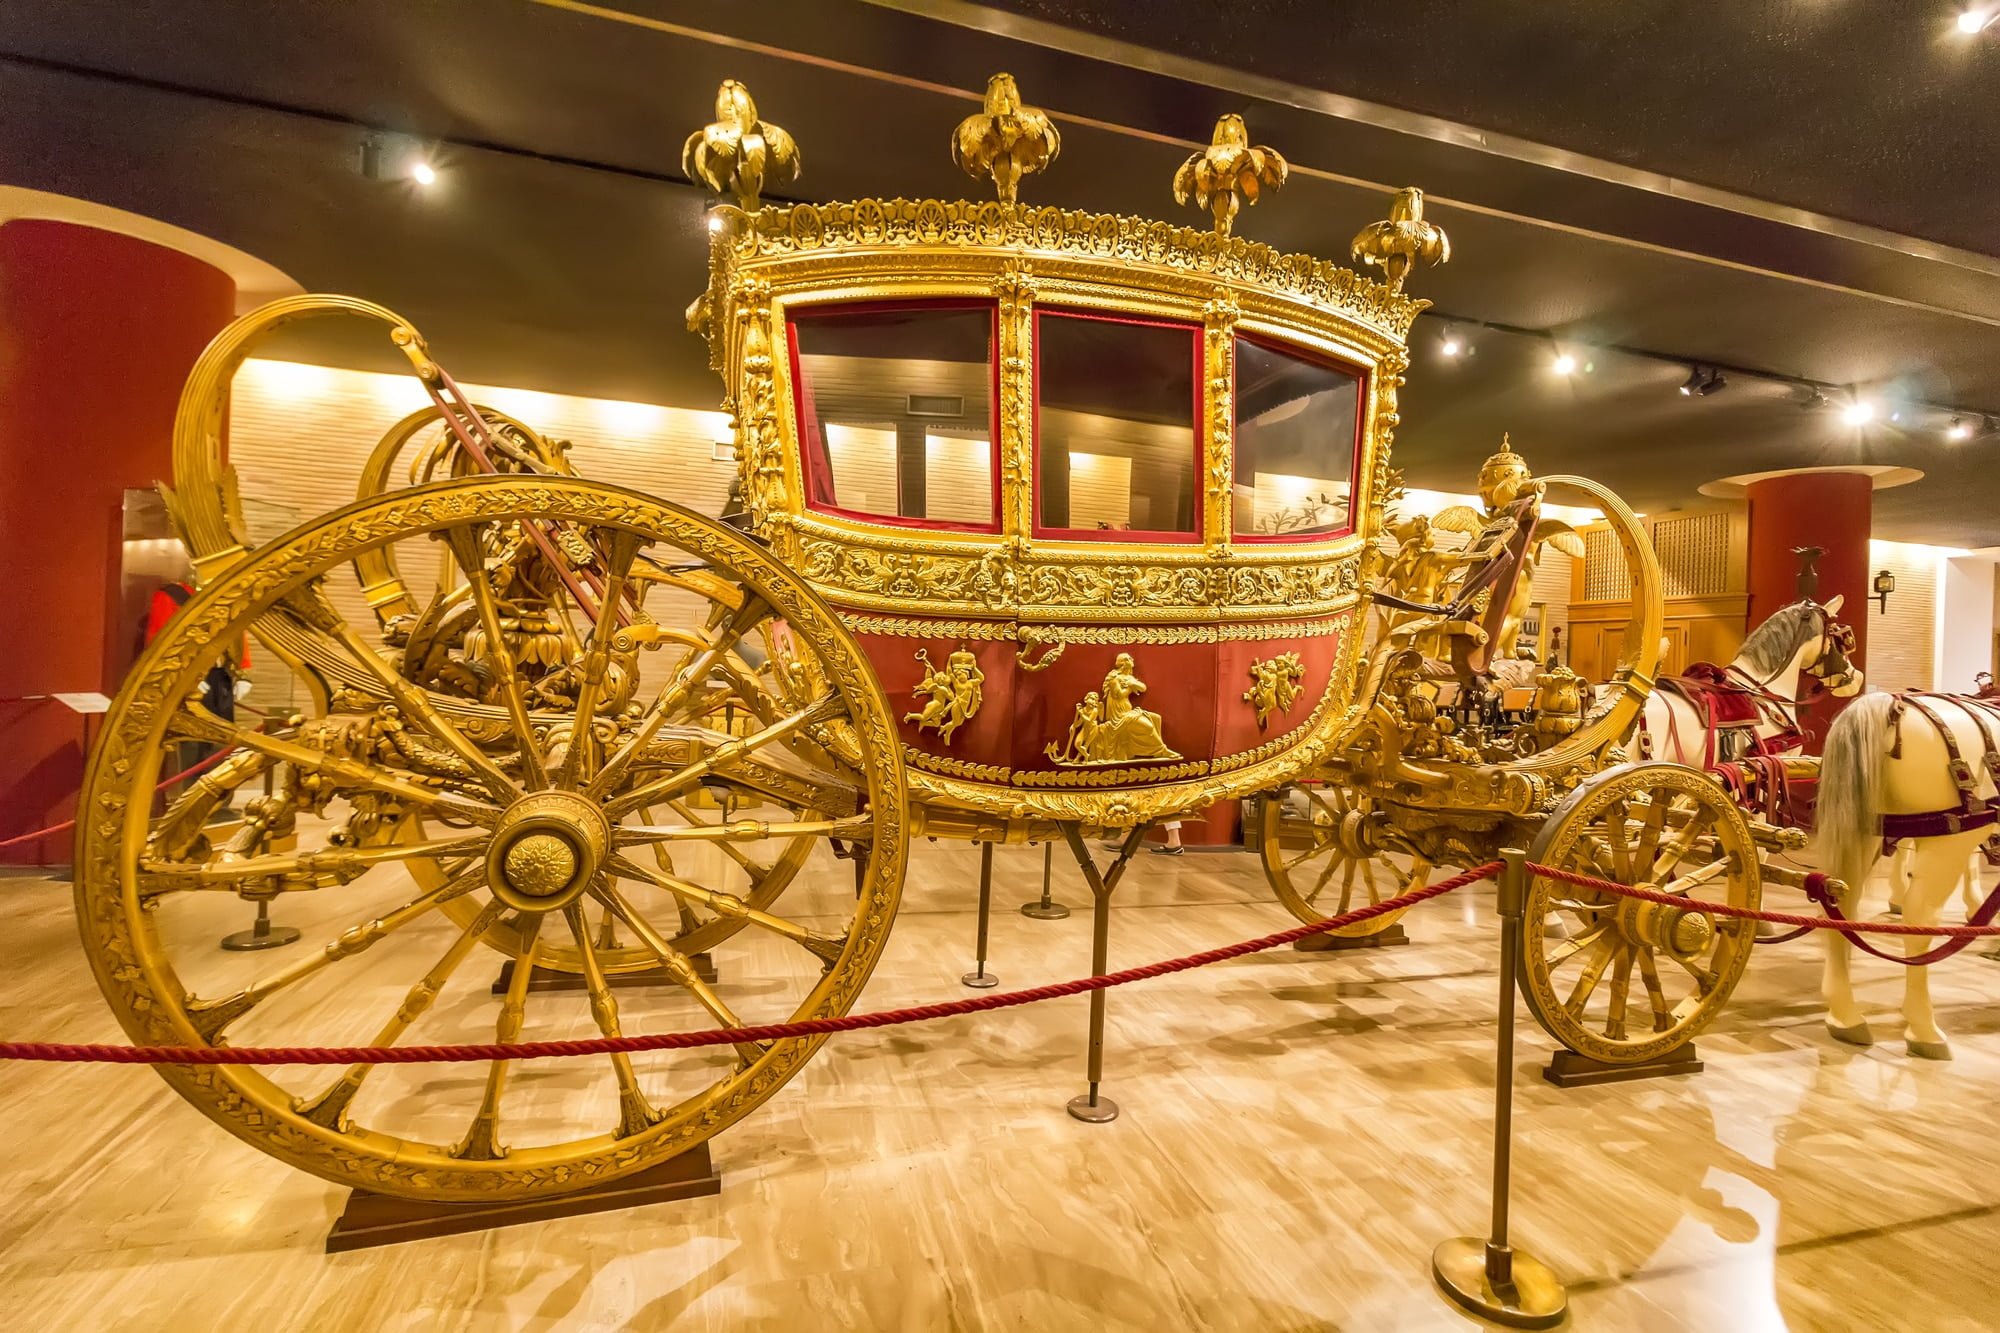 Vatican - Carriage in the Hall of the historic transportation vehicles of the Pope, Vatican Museum. It was established in 1506.